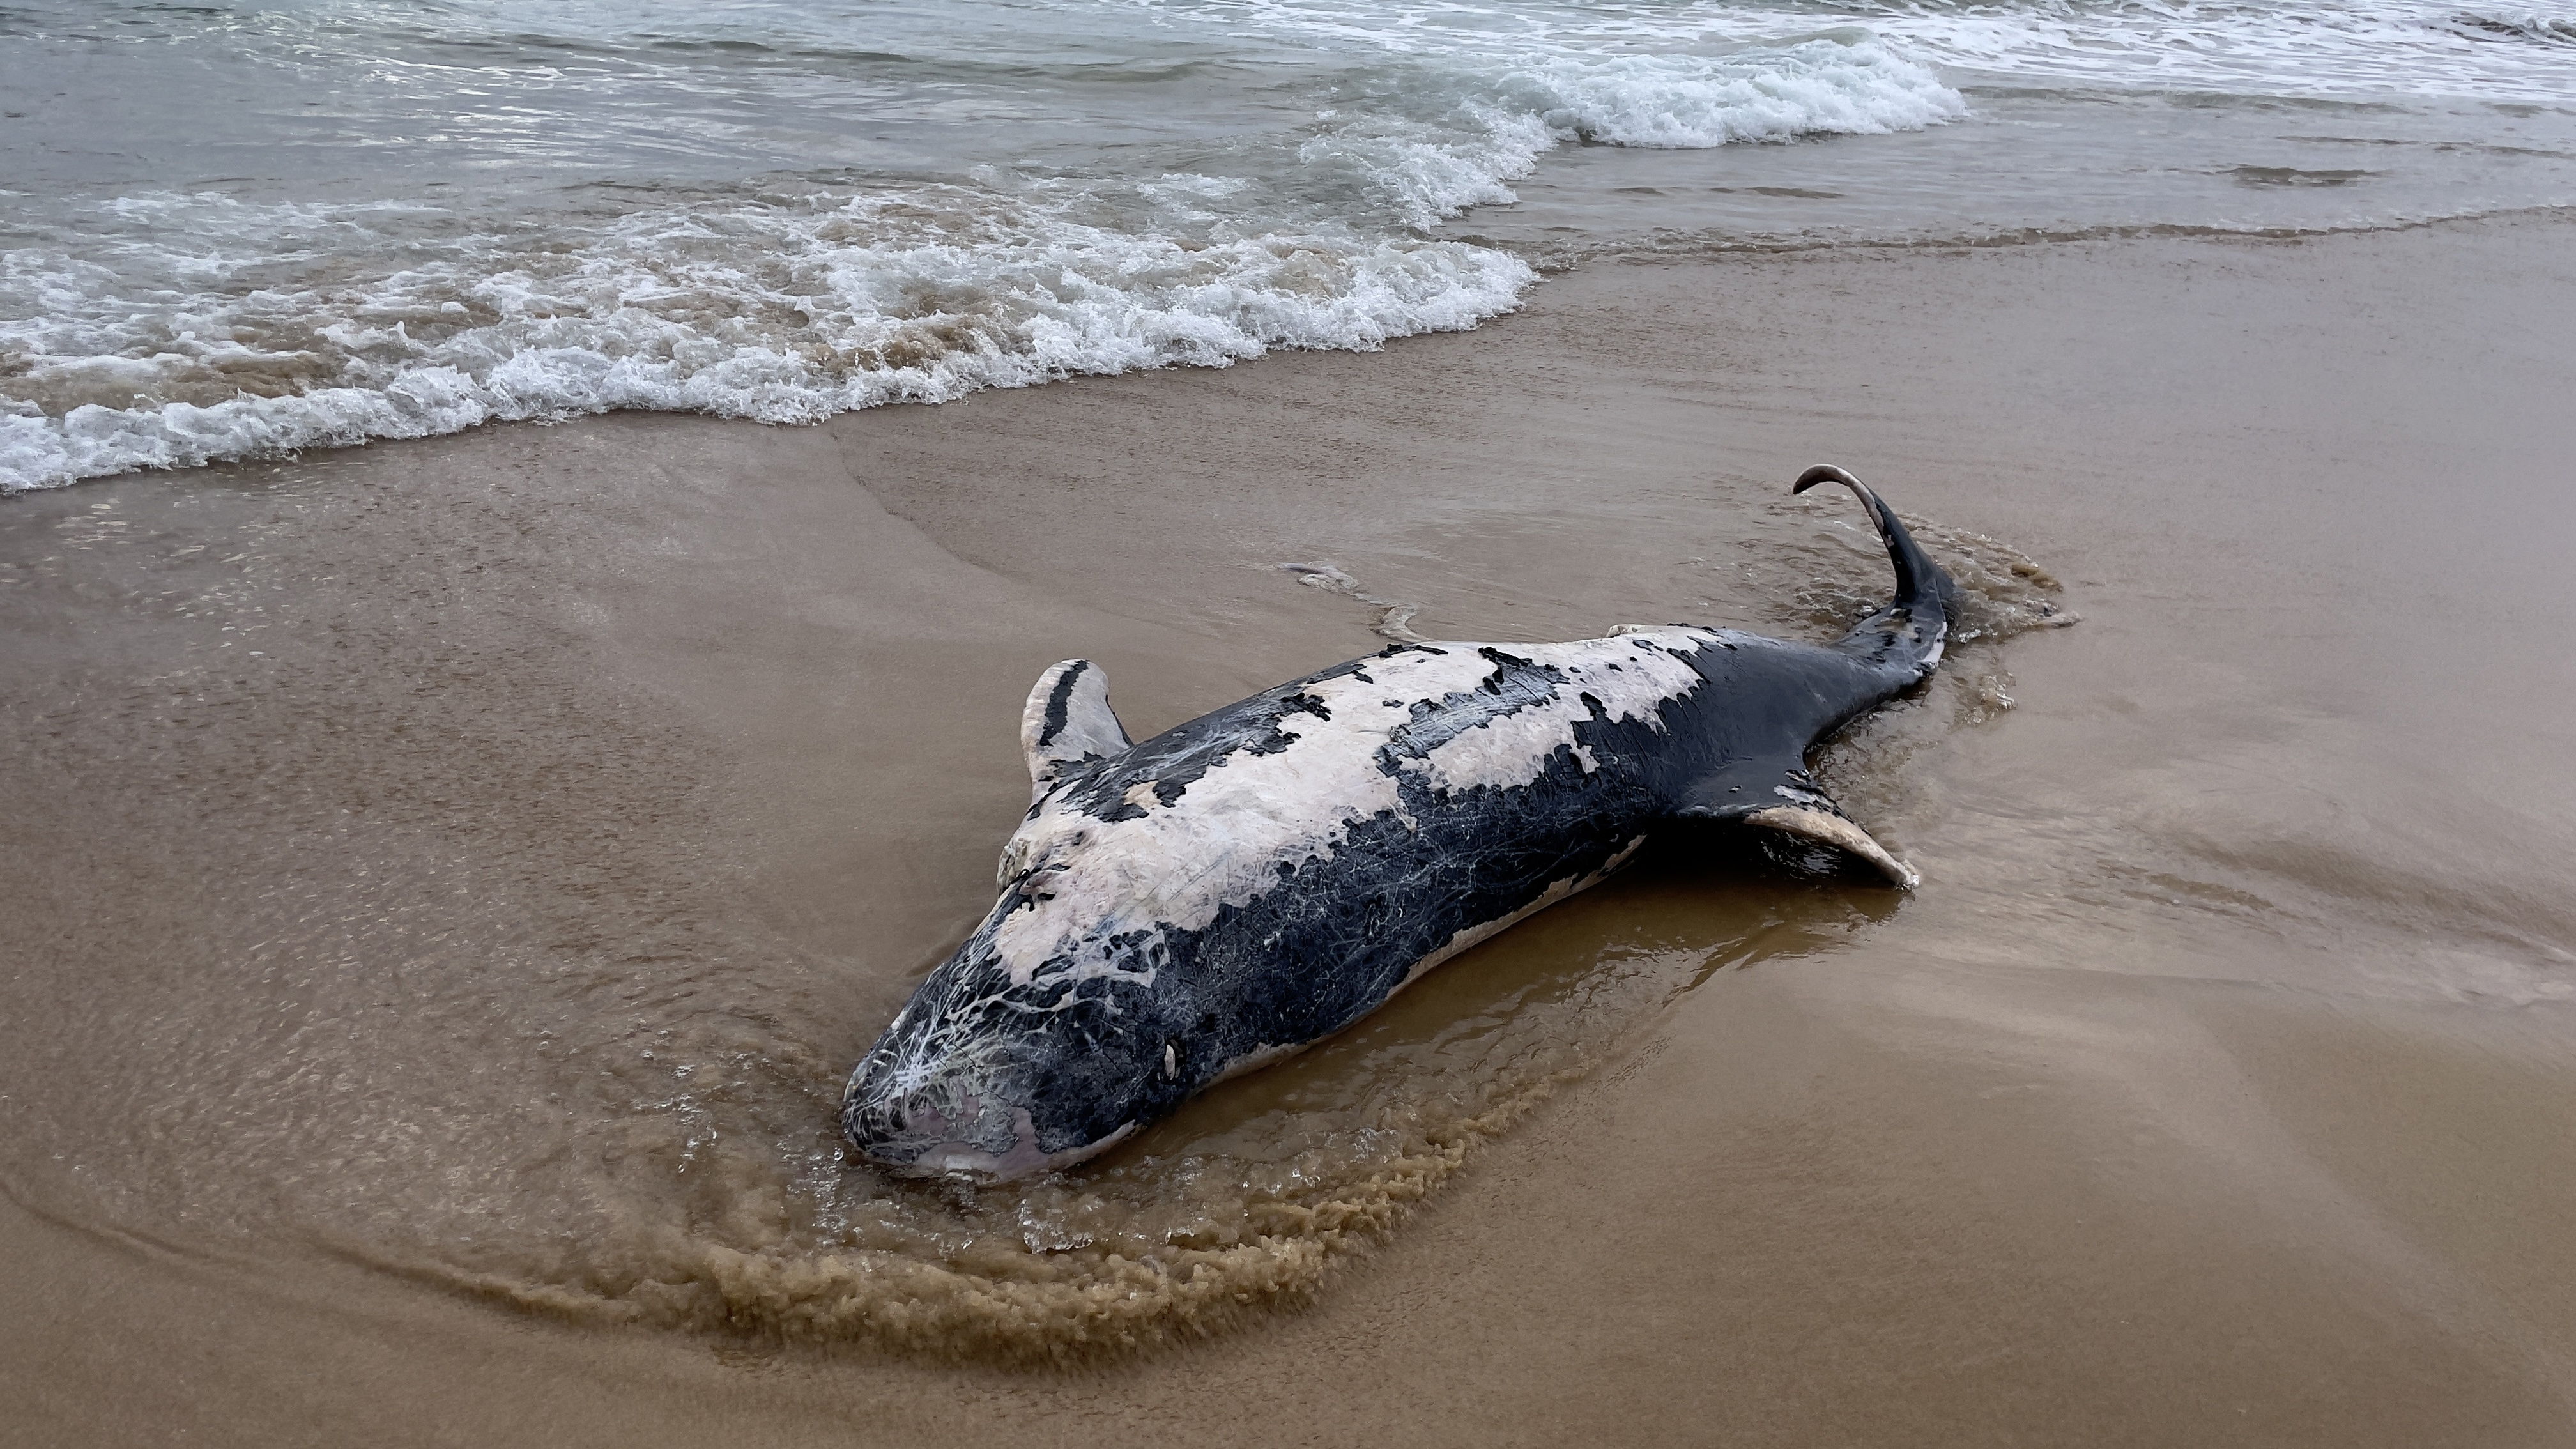 A dolphin carcass was found at a beach in Cronulla with a massive shark bite.